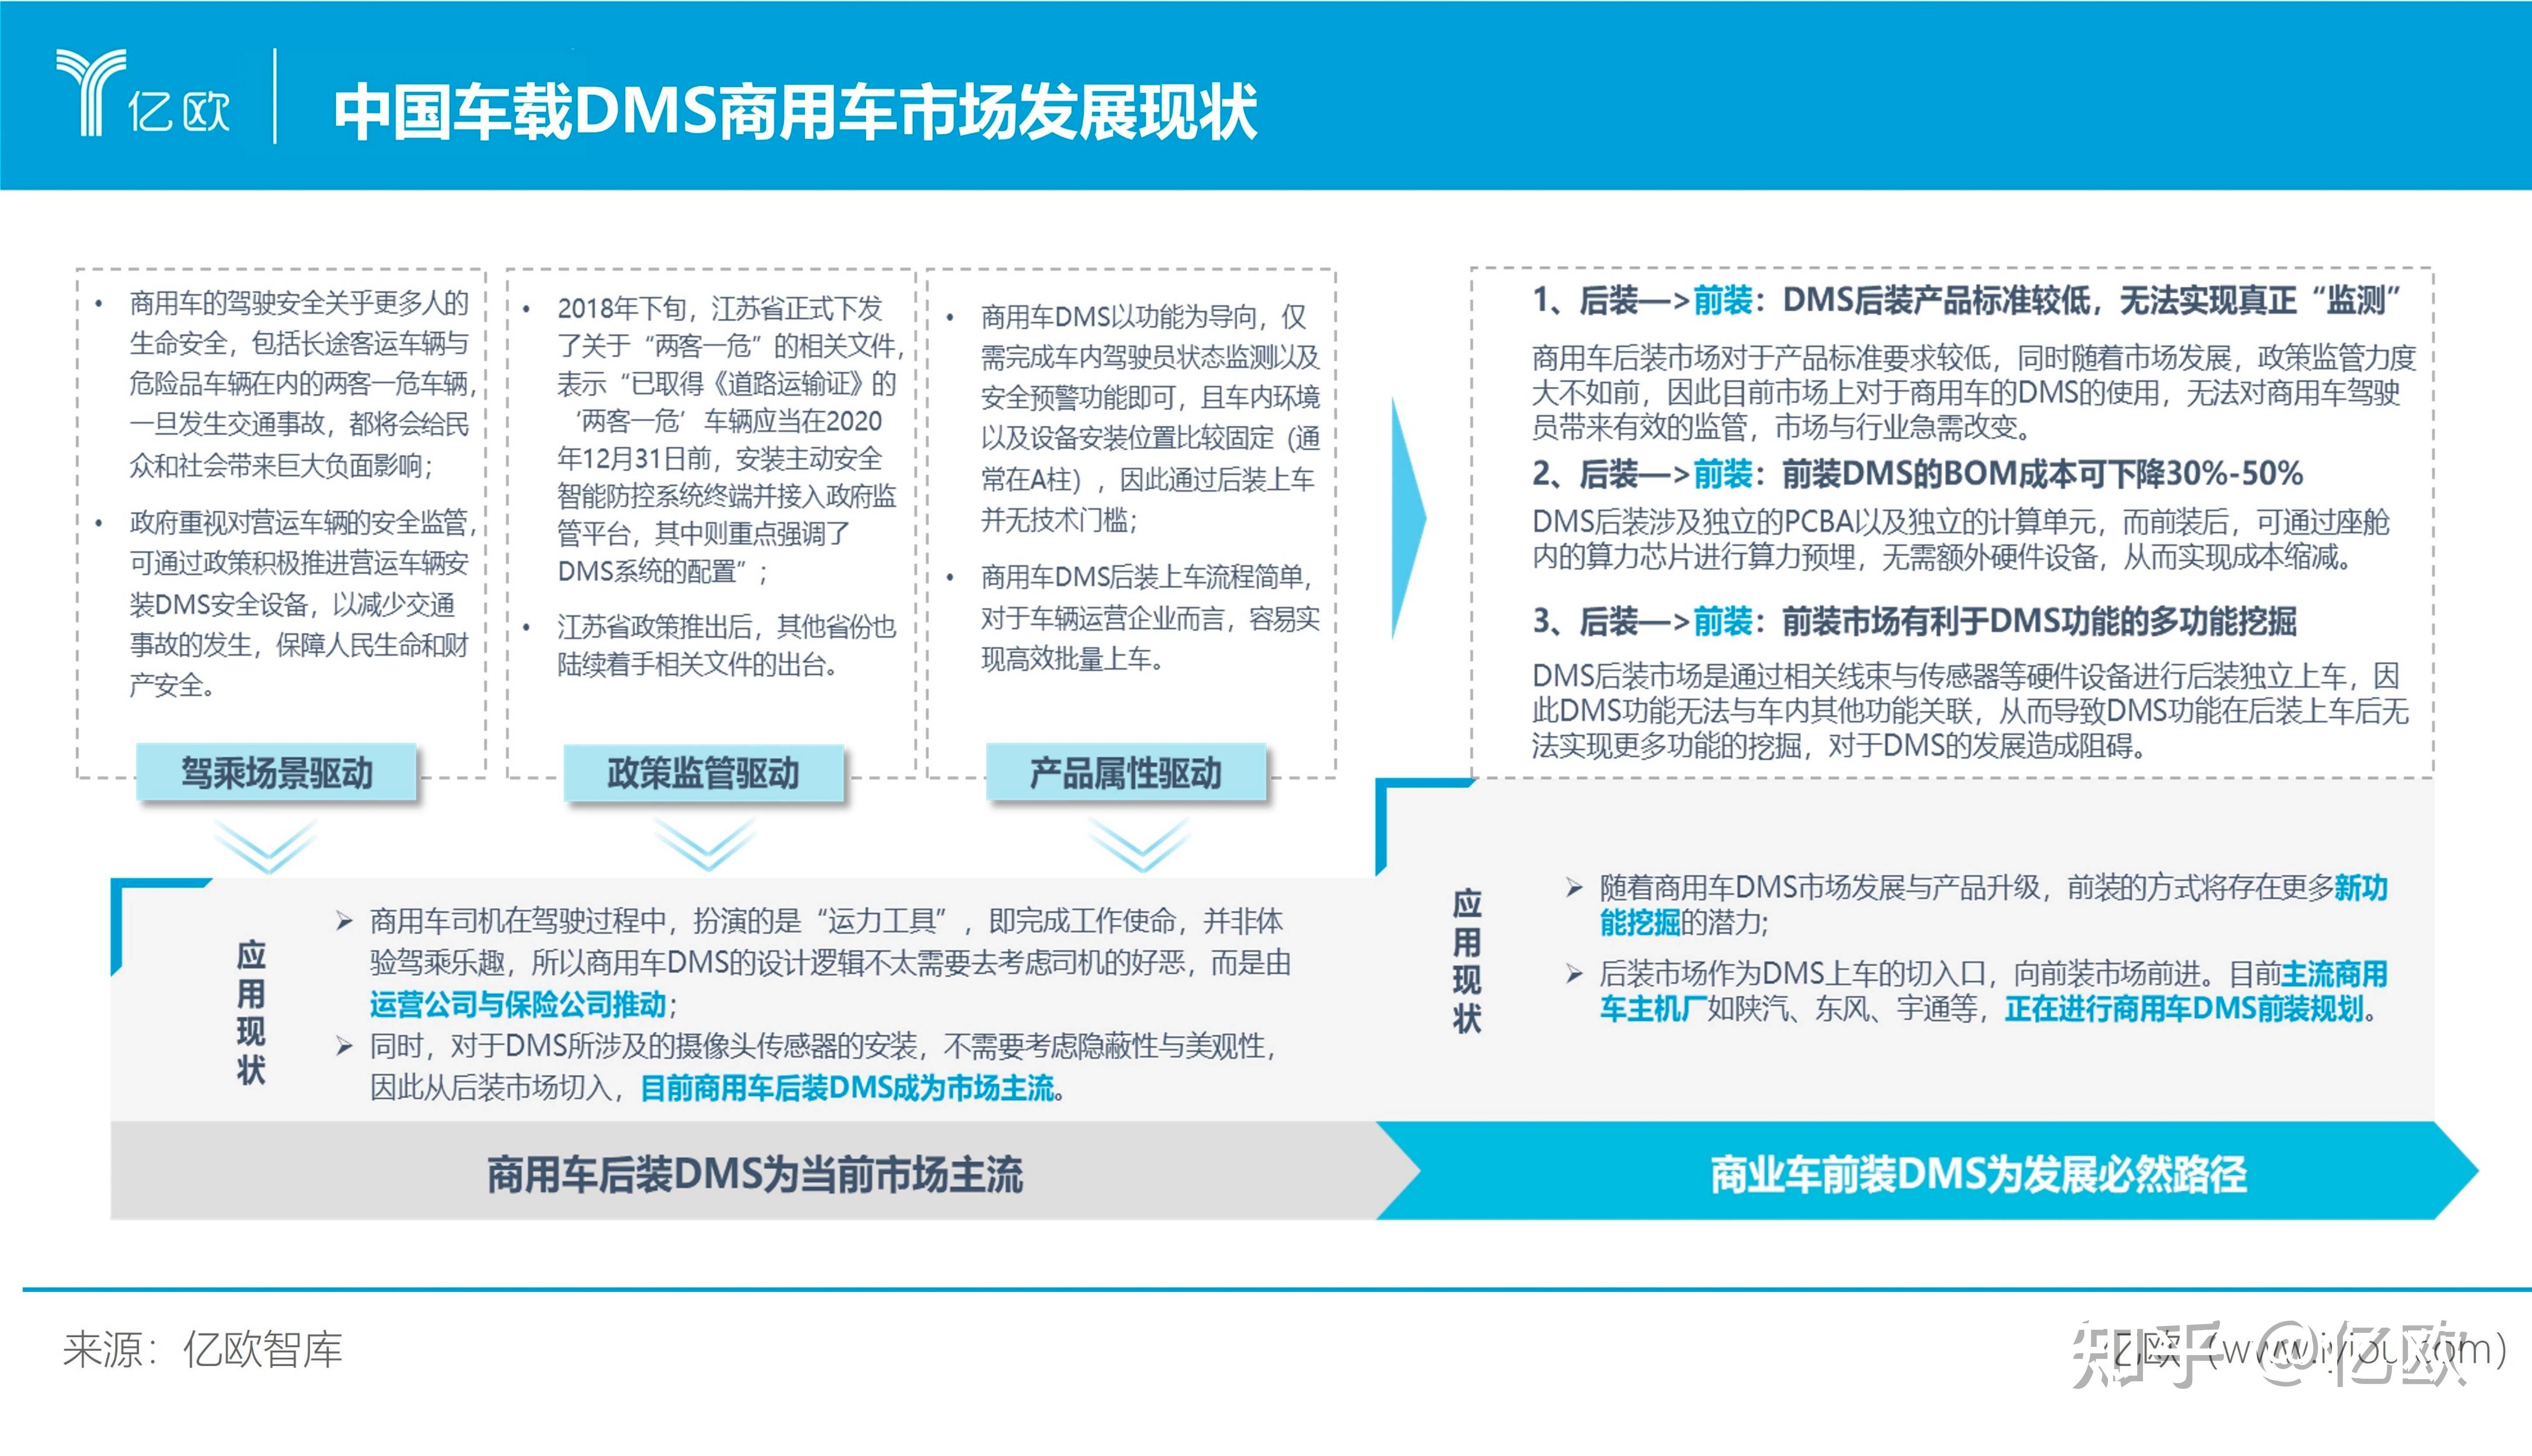 What Is A Distributor Management System (DMS)?